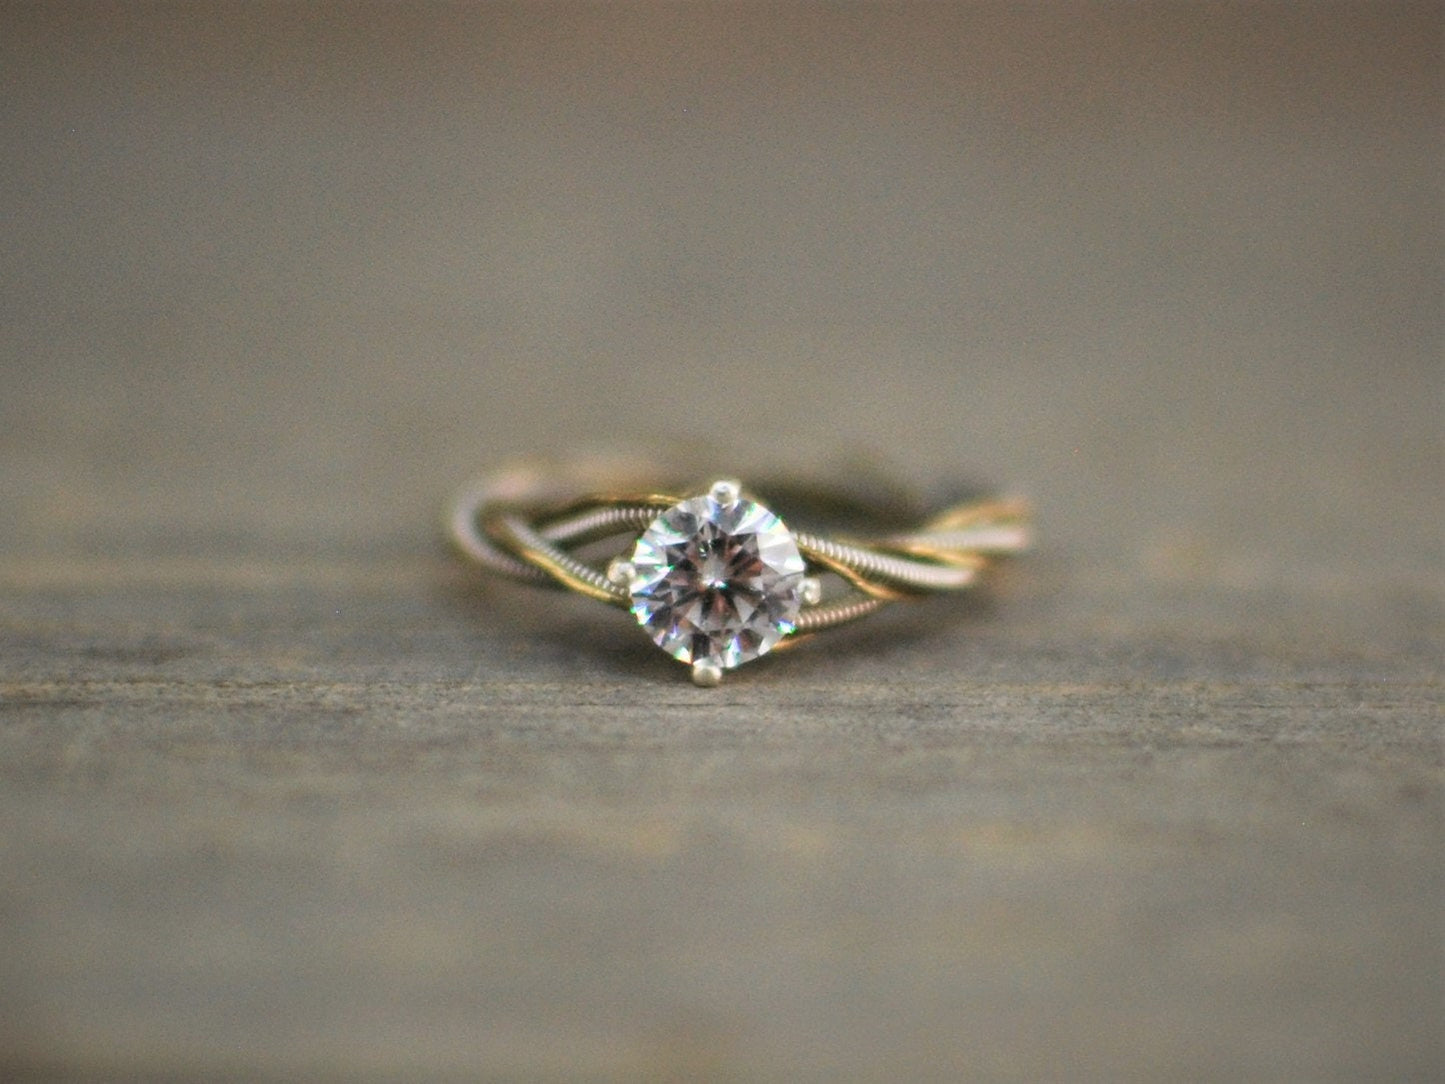 Guitar String Engagement Ring, Purity Ring, Unique Engagement Ring, Birthstone, Guitar String Jewelry, Guitar Gifts, Silver and Gold Ring